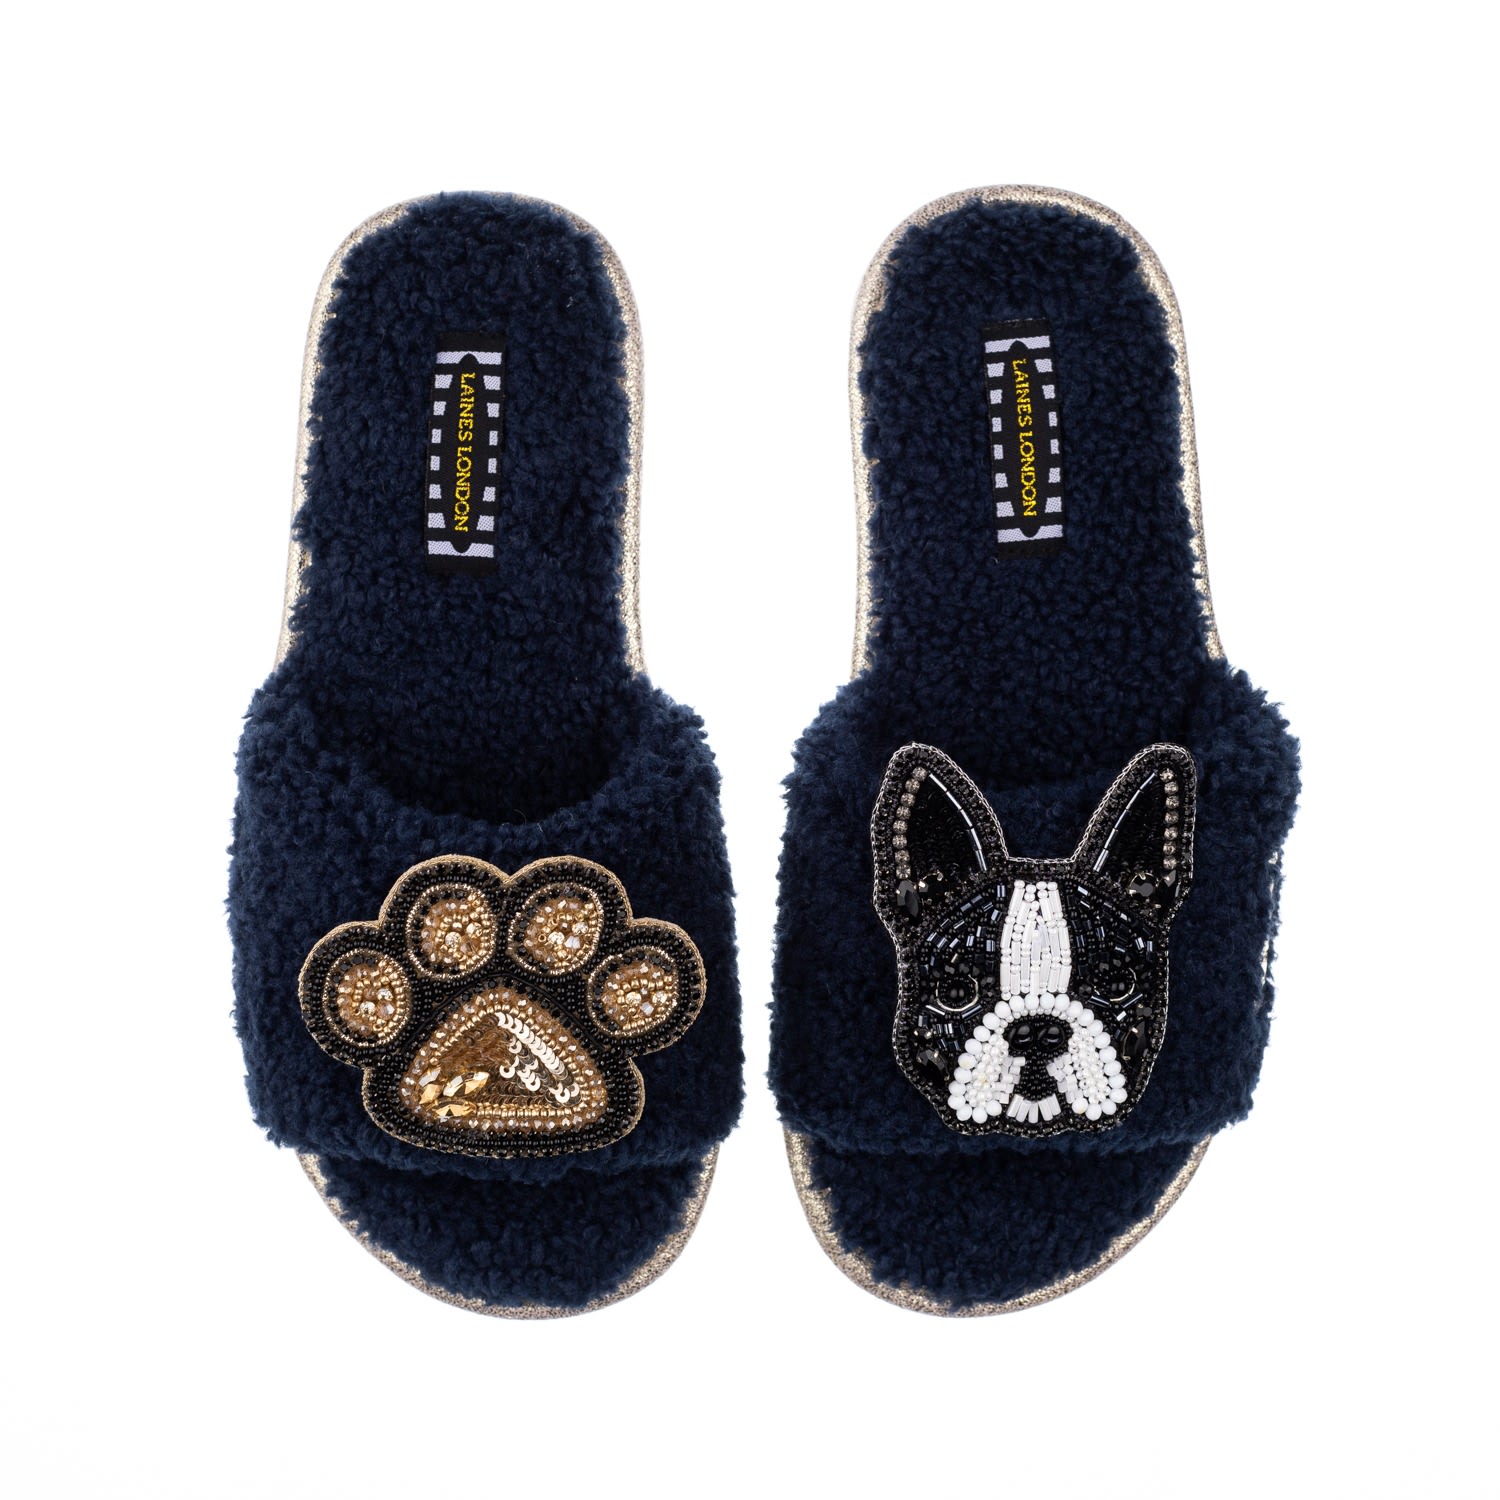 Women’s Blue Teddy Towelling Slipper Sliders With Buddy Boston Terrier & Paw Brooches - Navy Medium Laines London